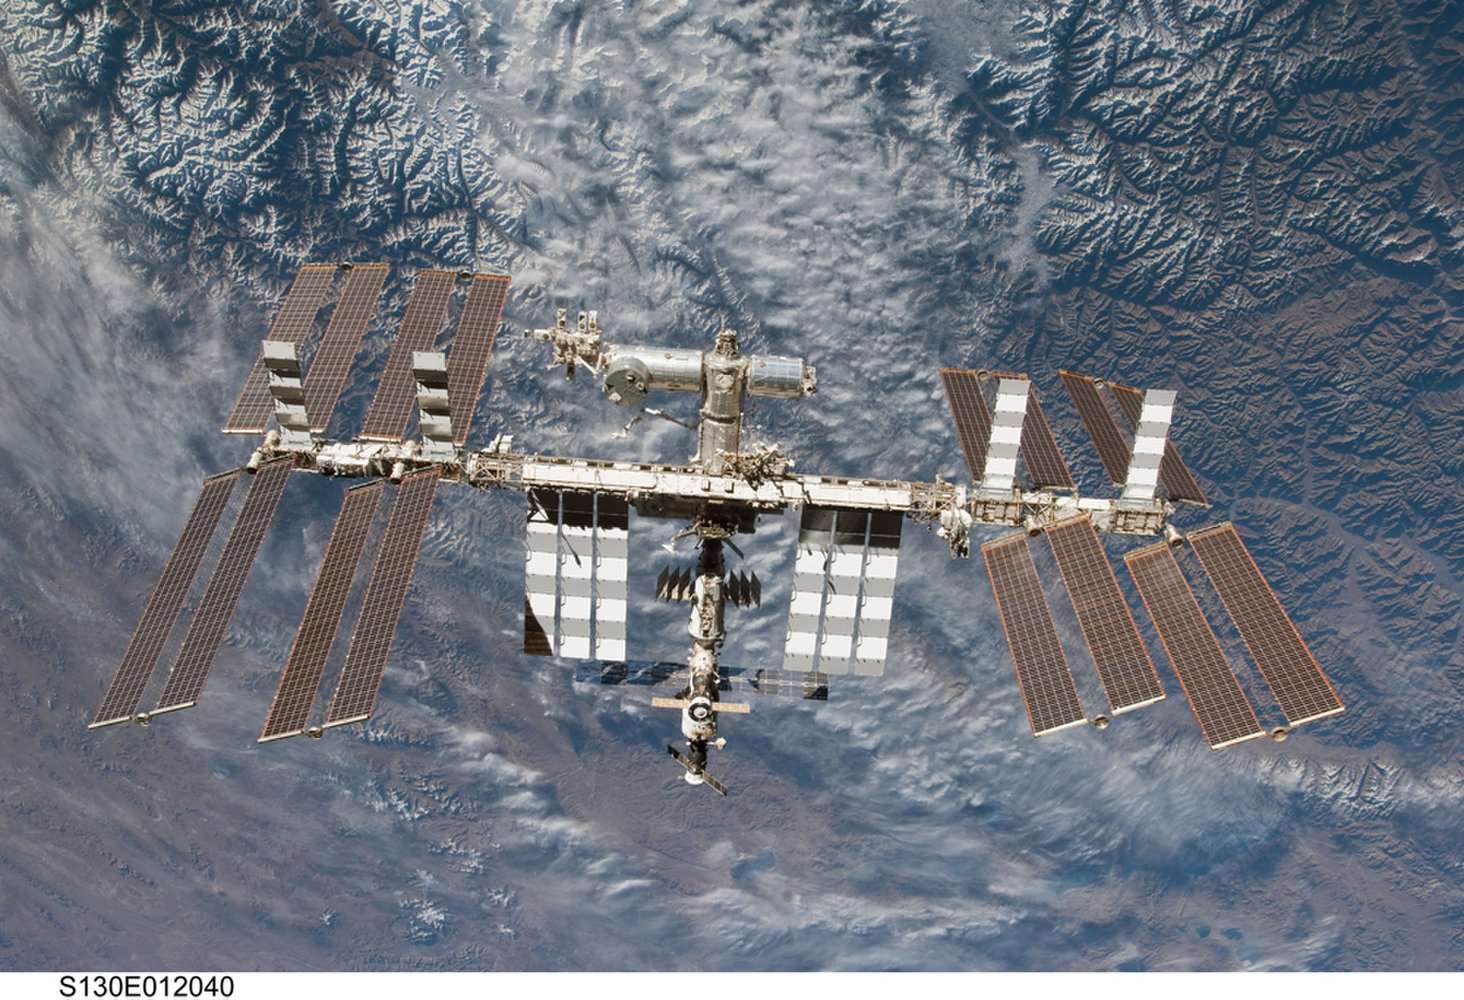 image for International Space Station: Facts, History & Tracking